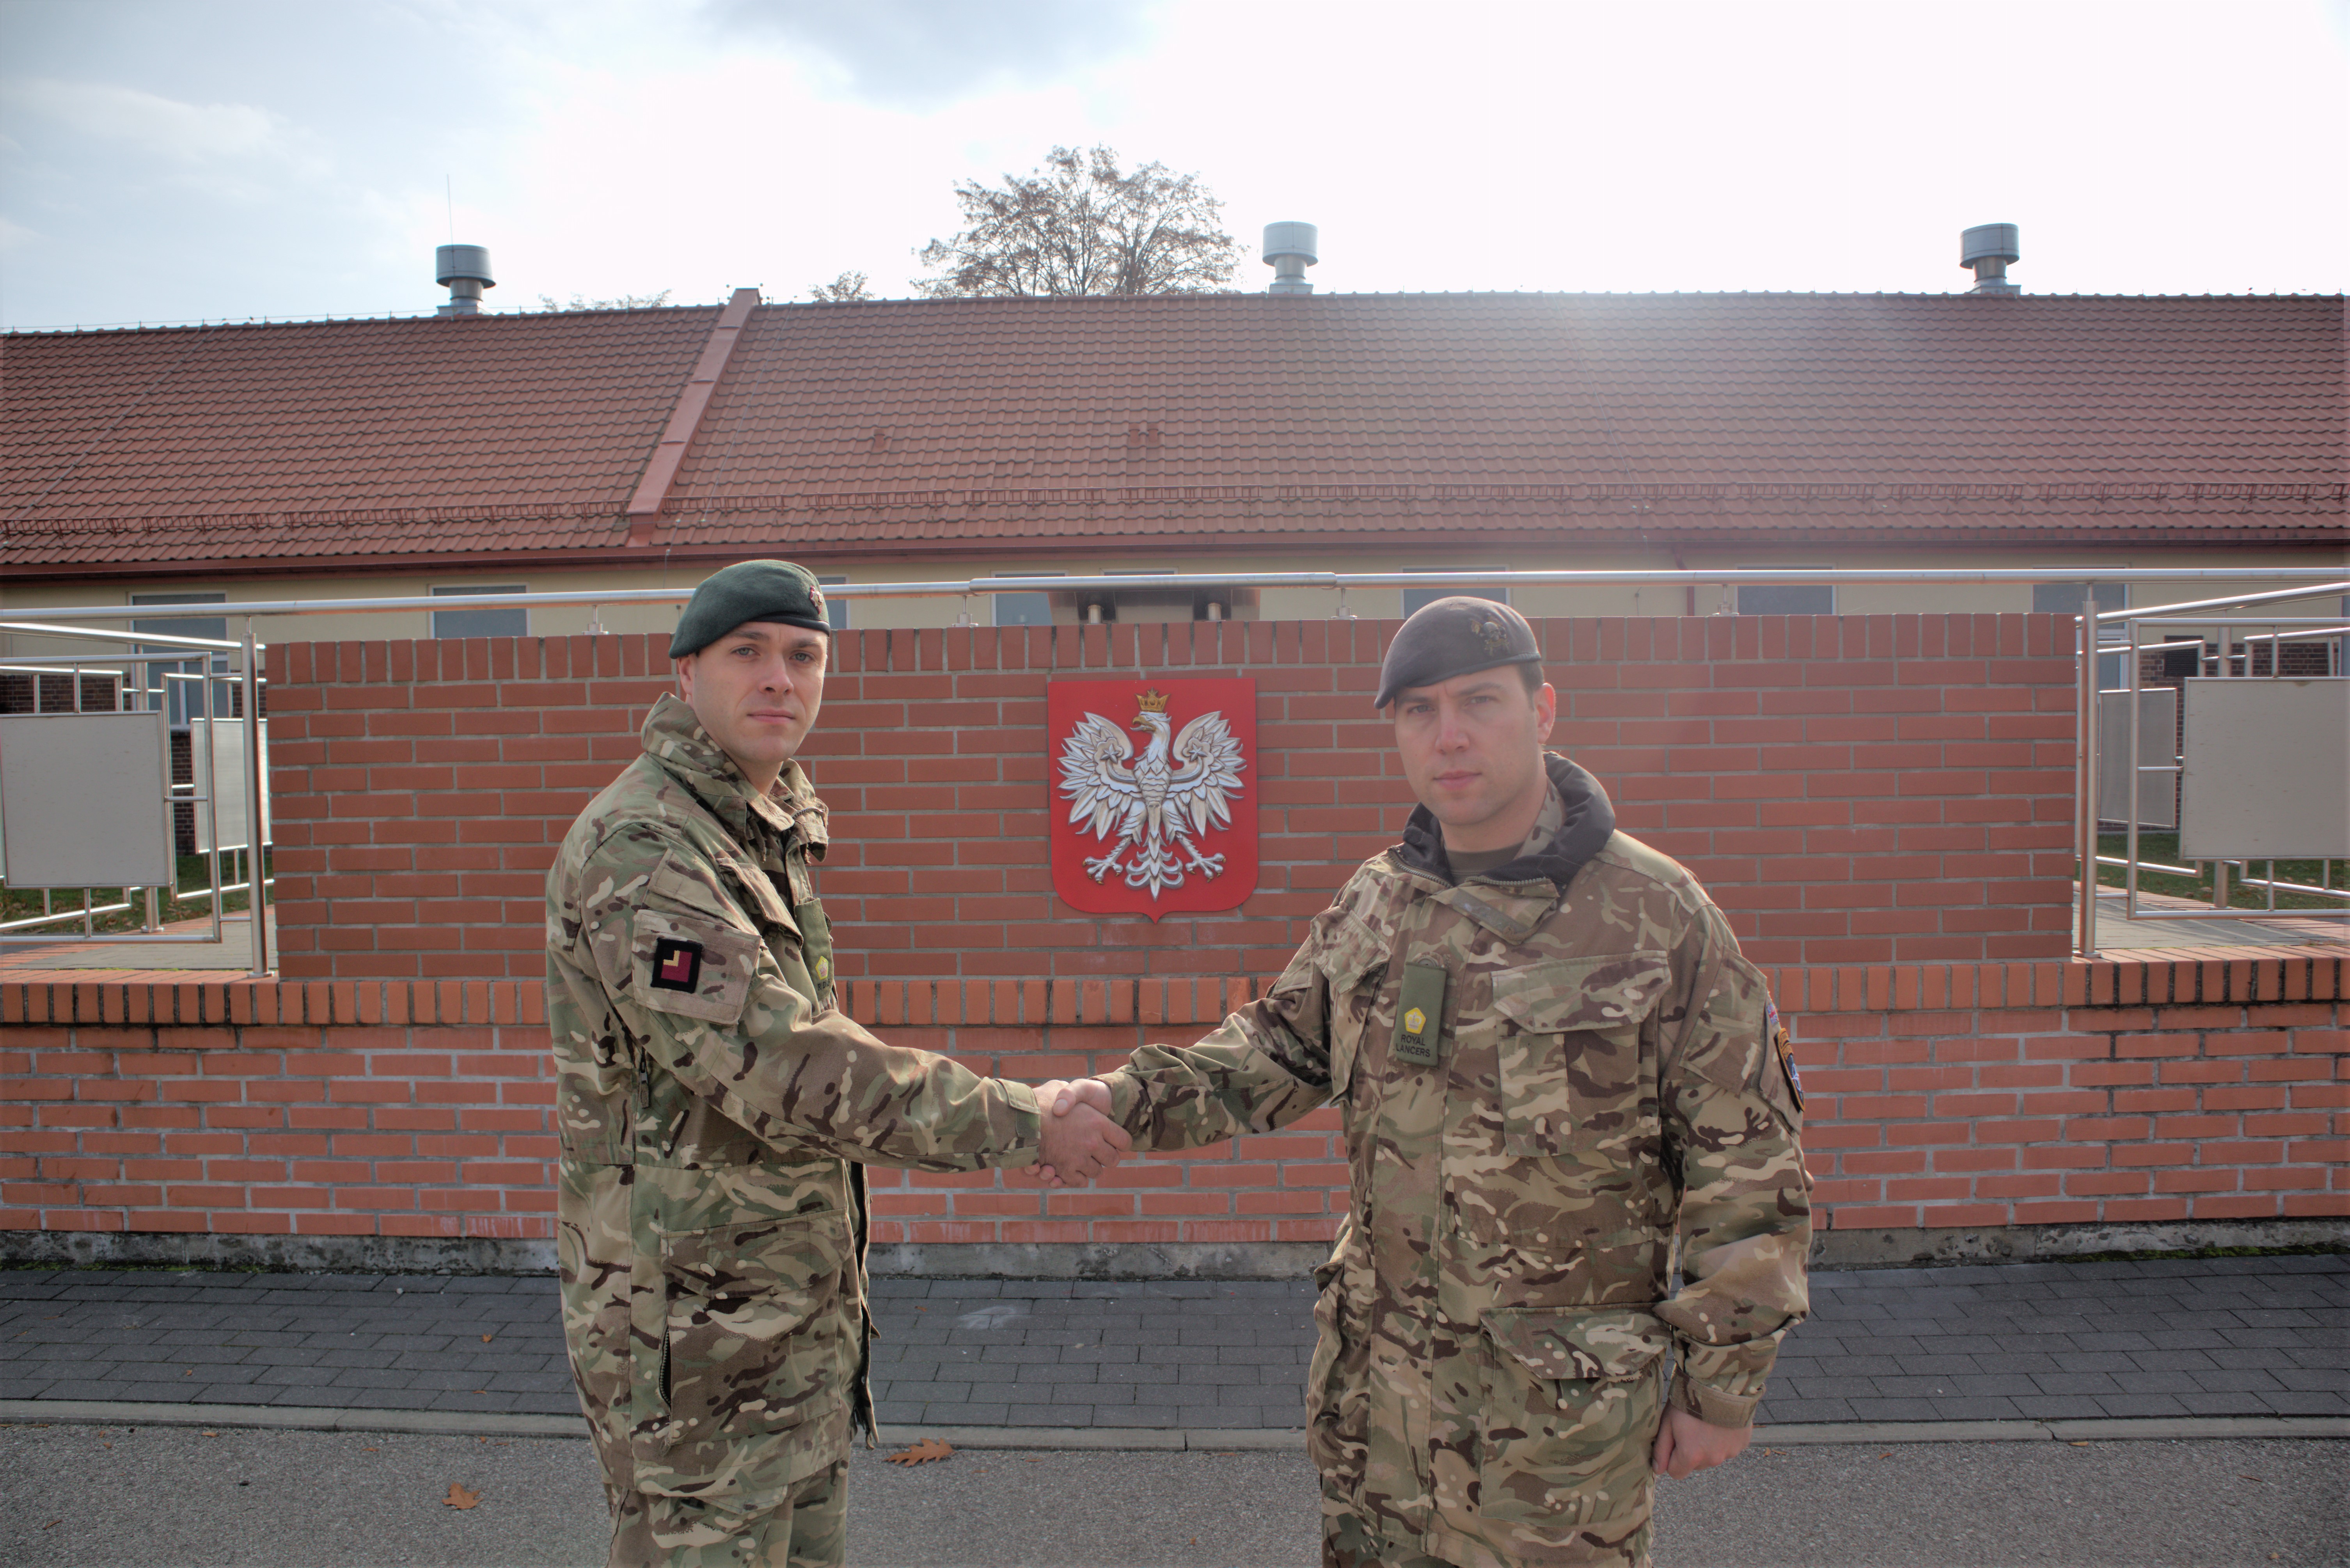 British Army rotates troops in Poland as part of NATO’s enhanced forward presence